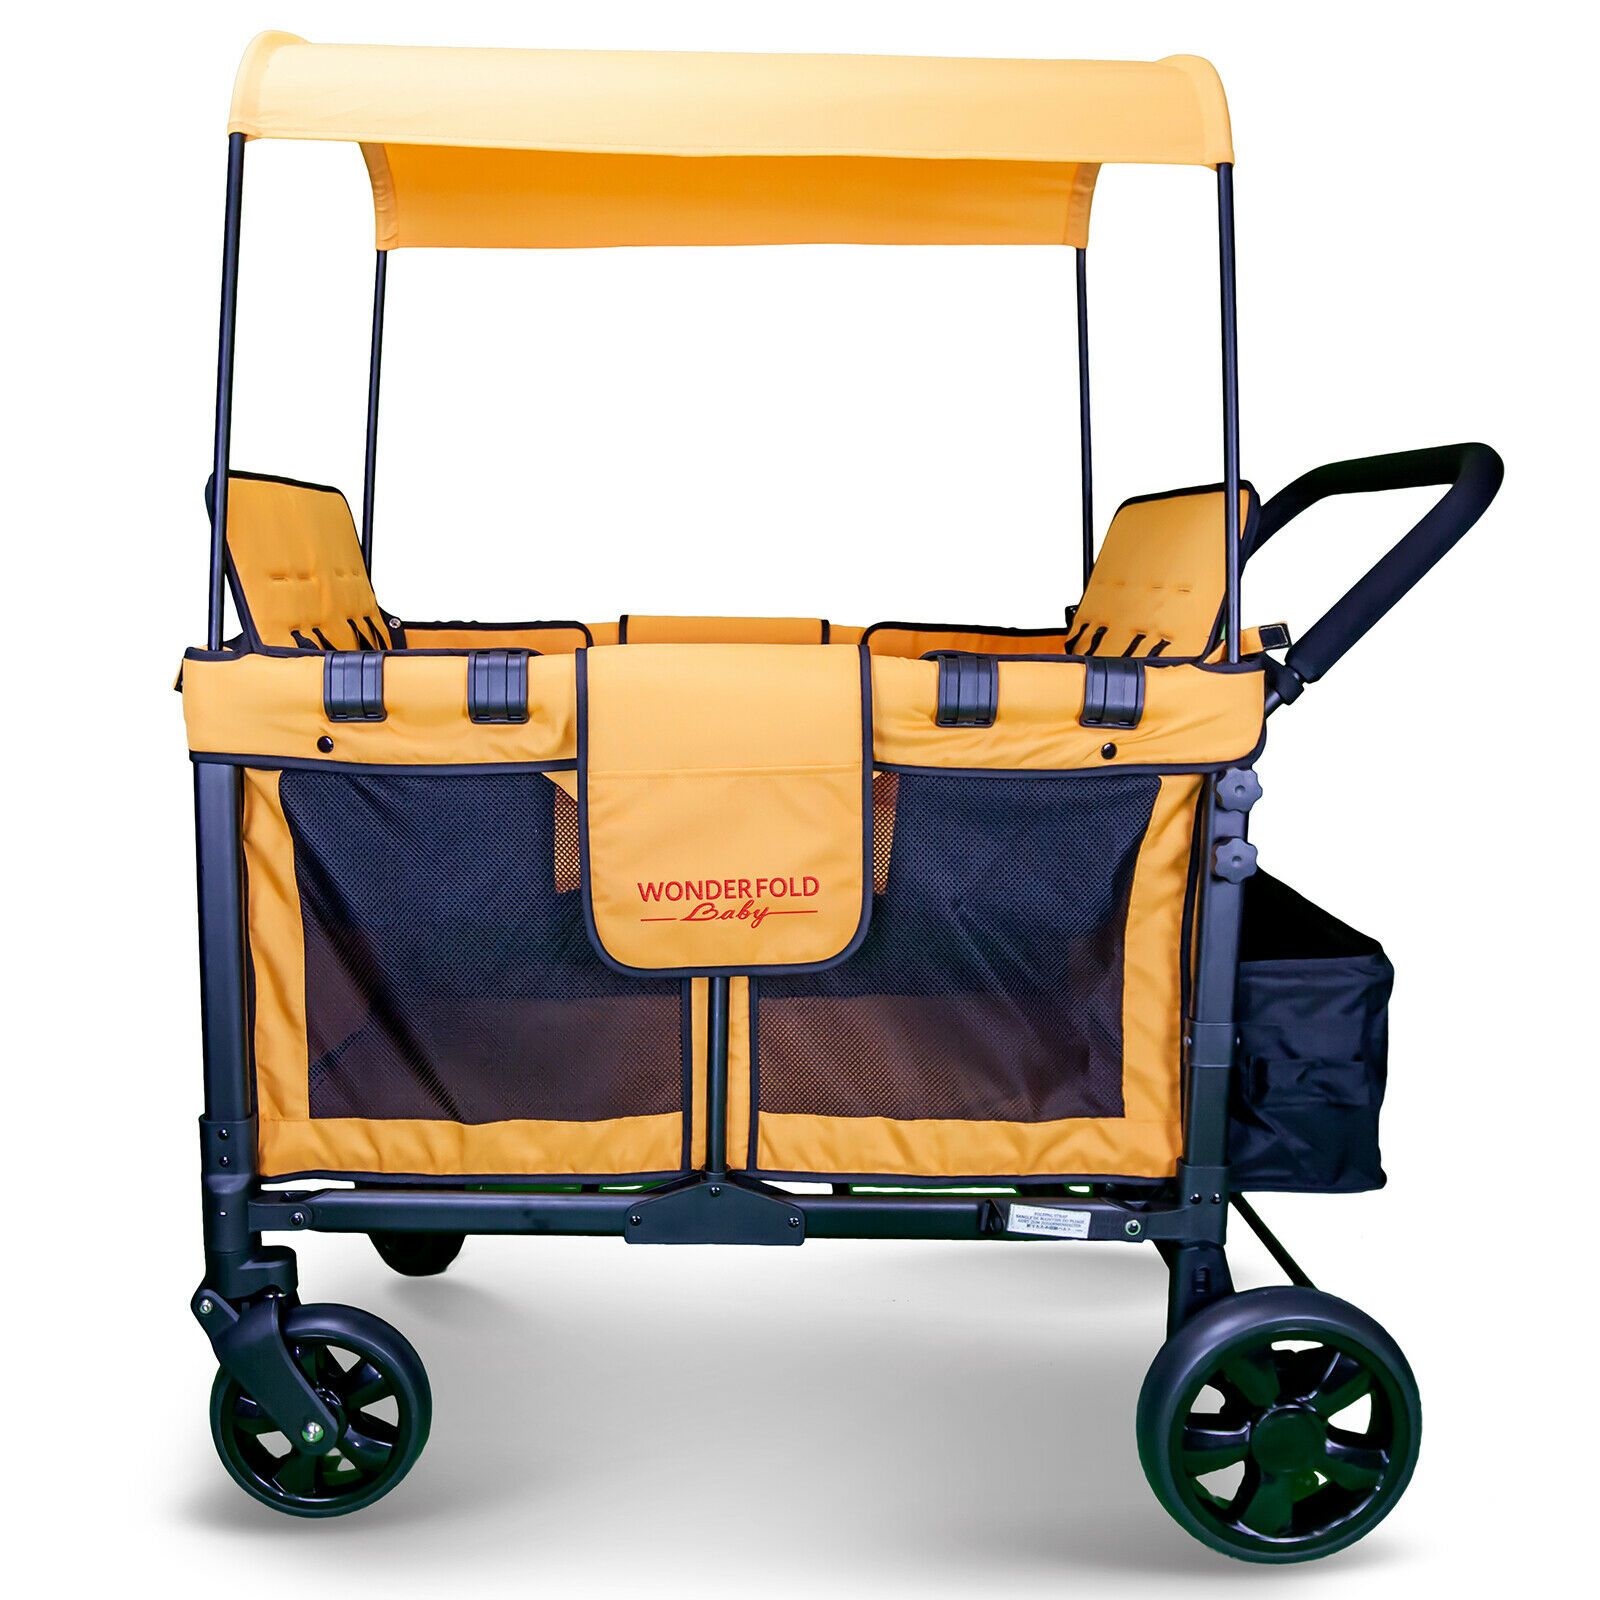 WonderFold Baby, WonderFold Baby W4 Multi-Function Folding Quad Stroller Wagon with Removable Canopy and Seats Orange New